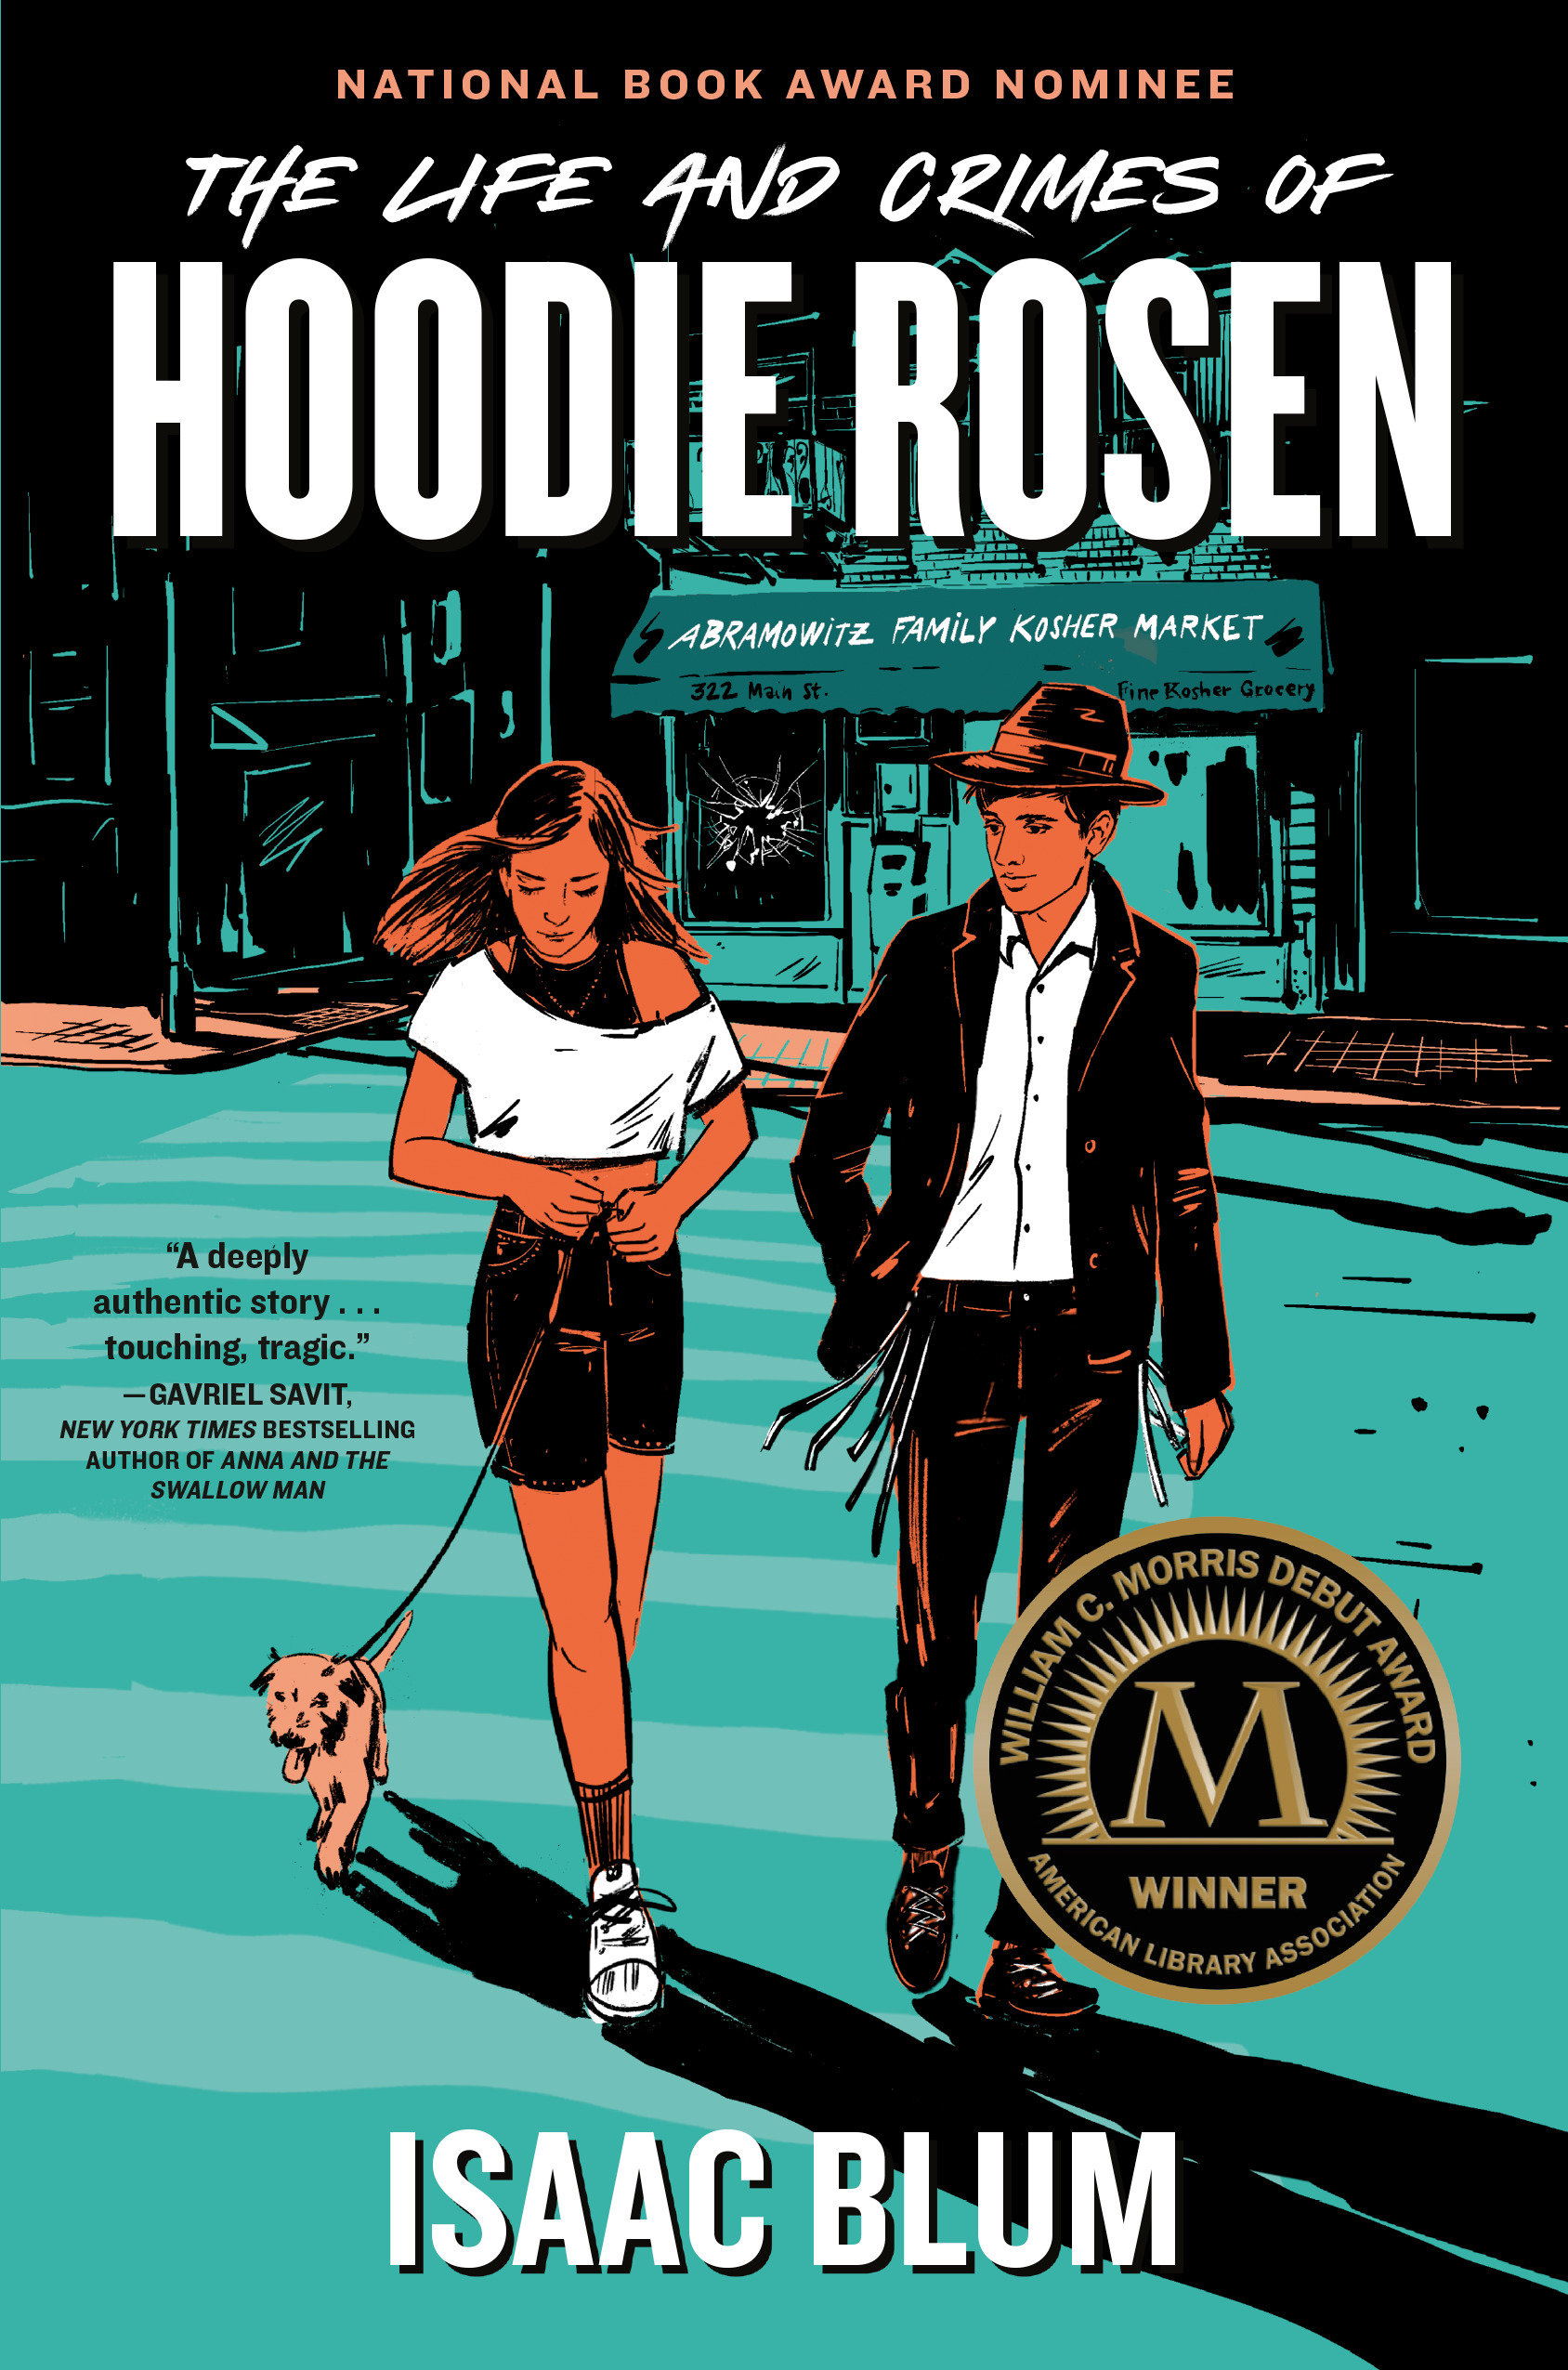 The Life And Crimes Of Hoodie Rosen (Hardcover Book)